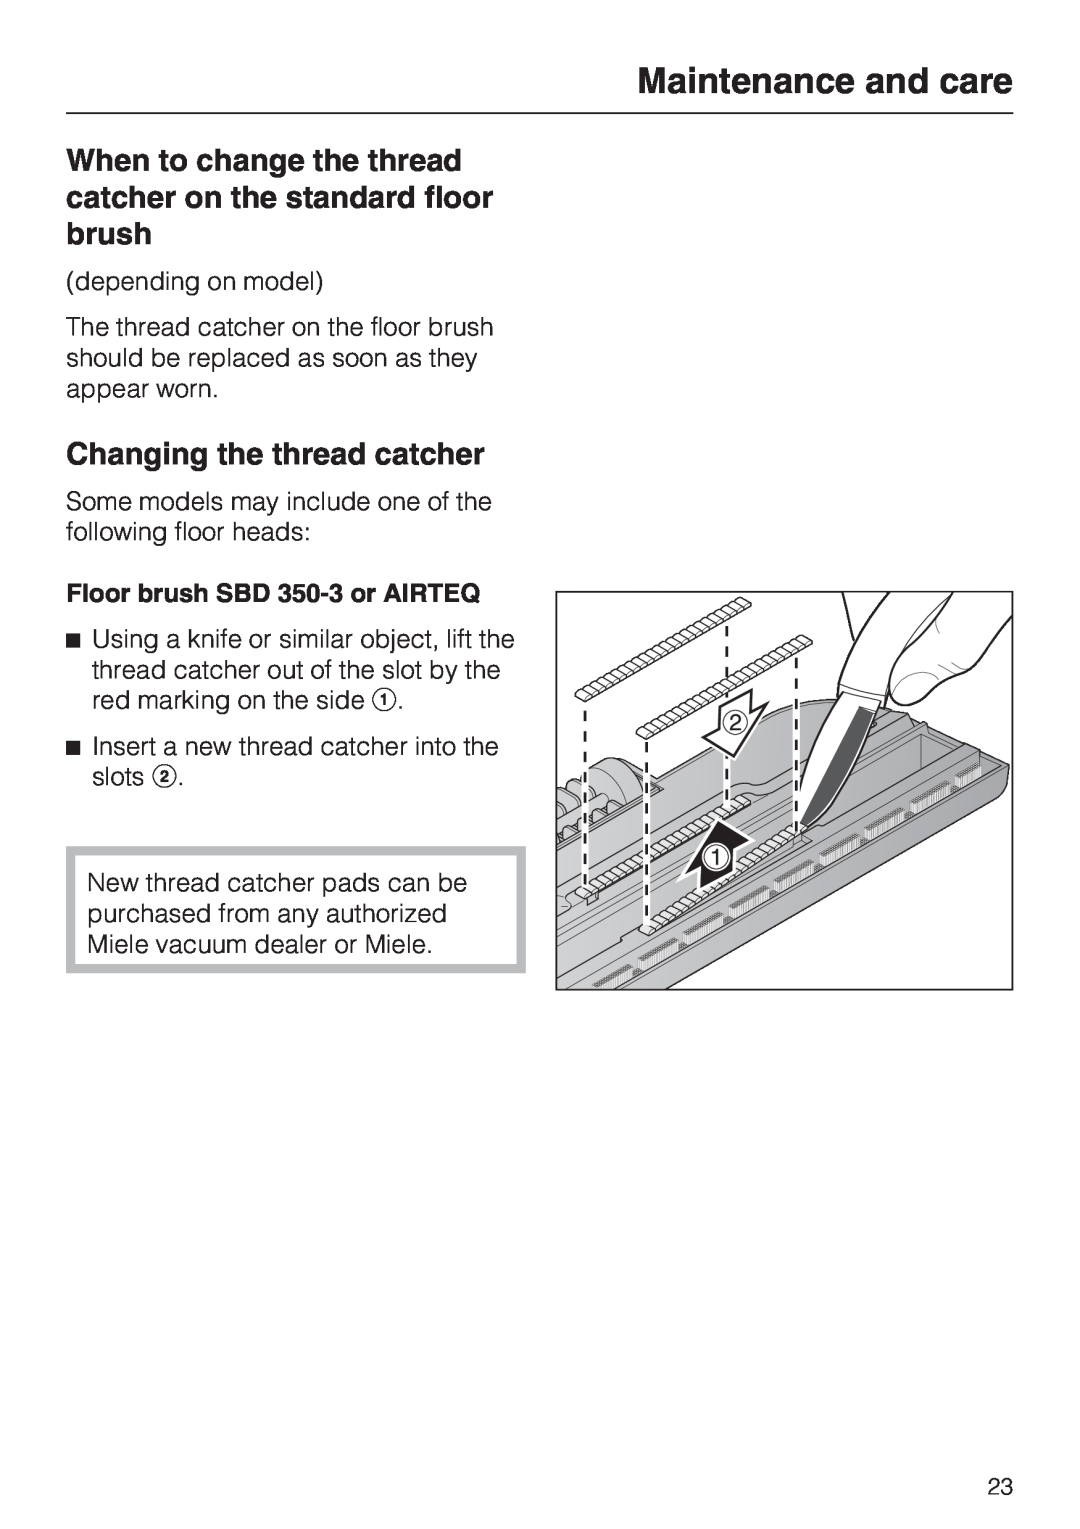 Miele S 2001 manual Changing the thread catcher, Floor brush SBD 350-3or AIRTEQ, Maintenance and care 